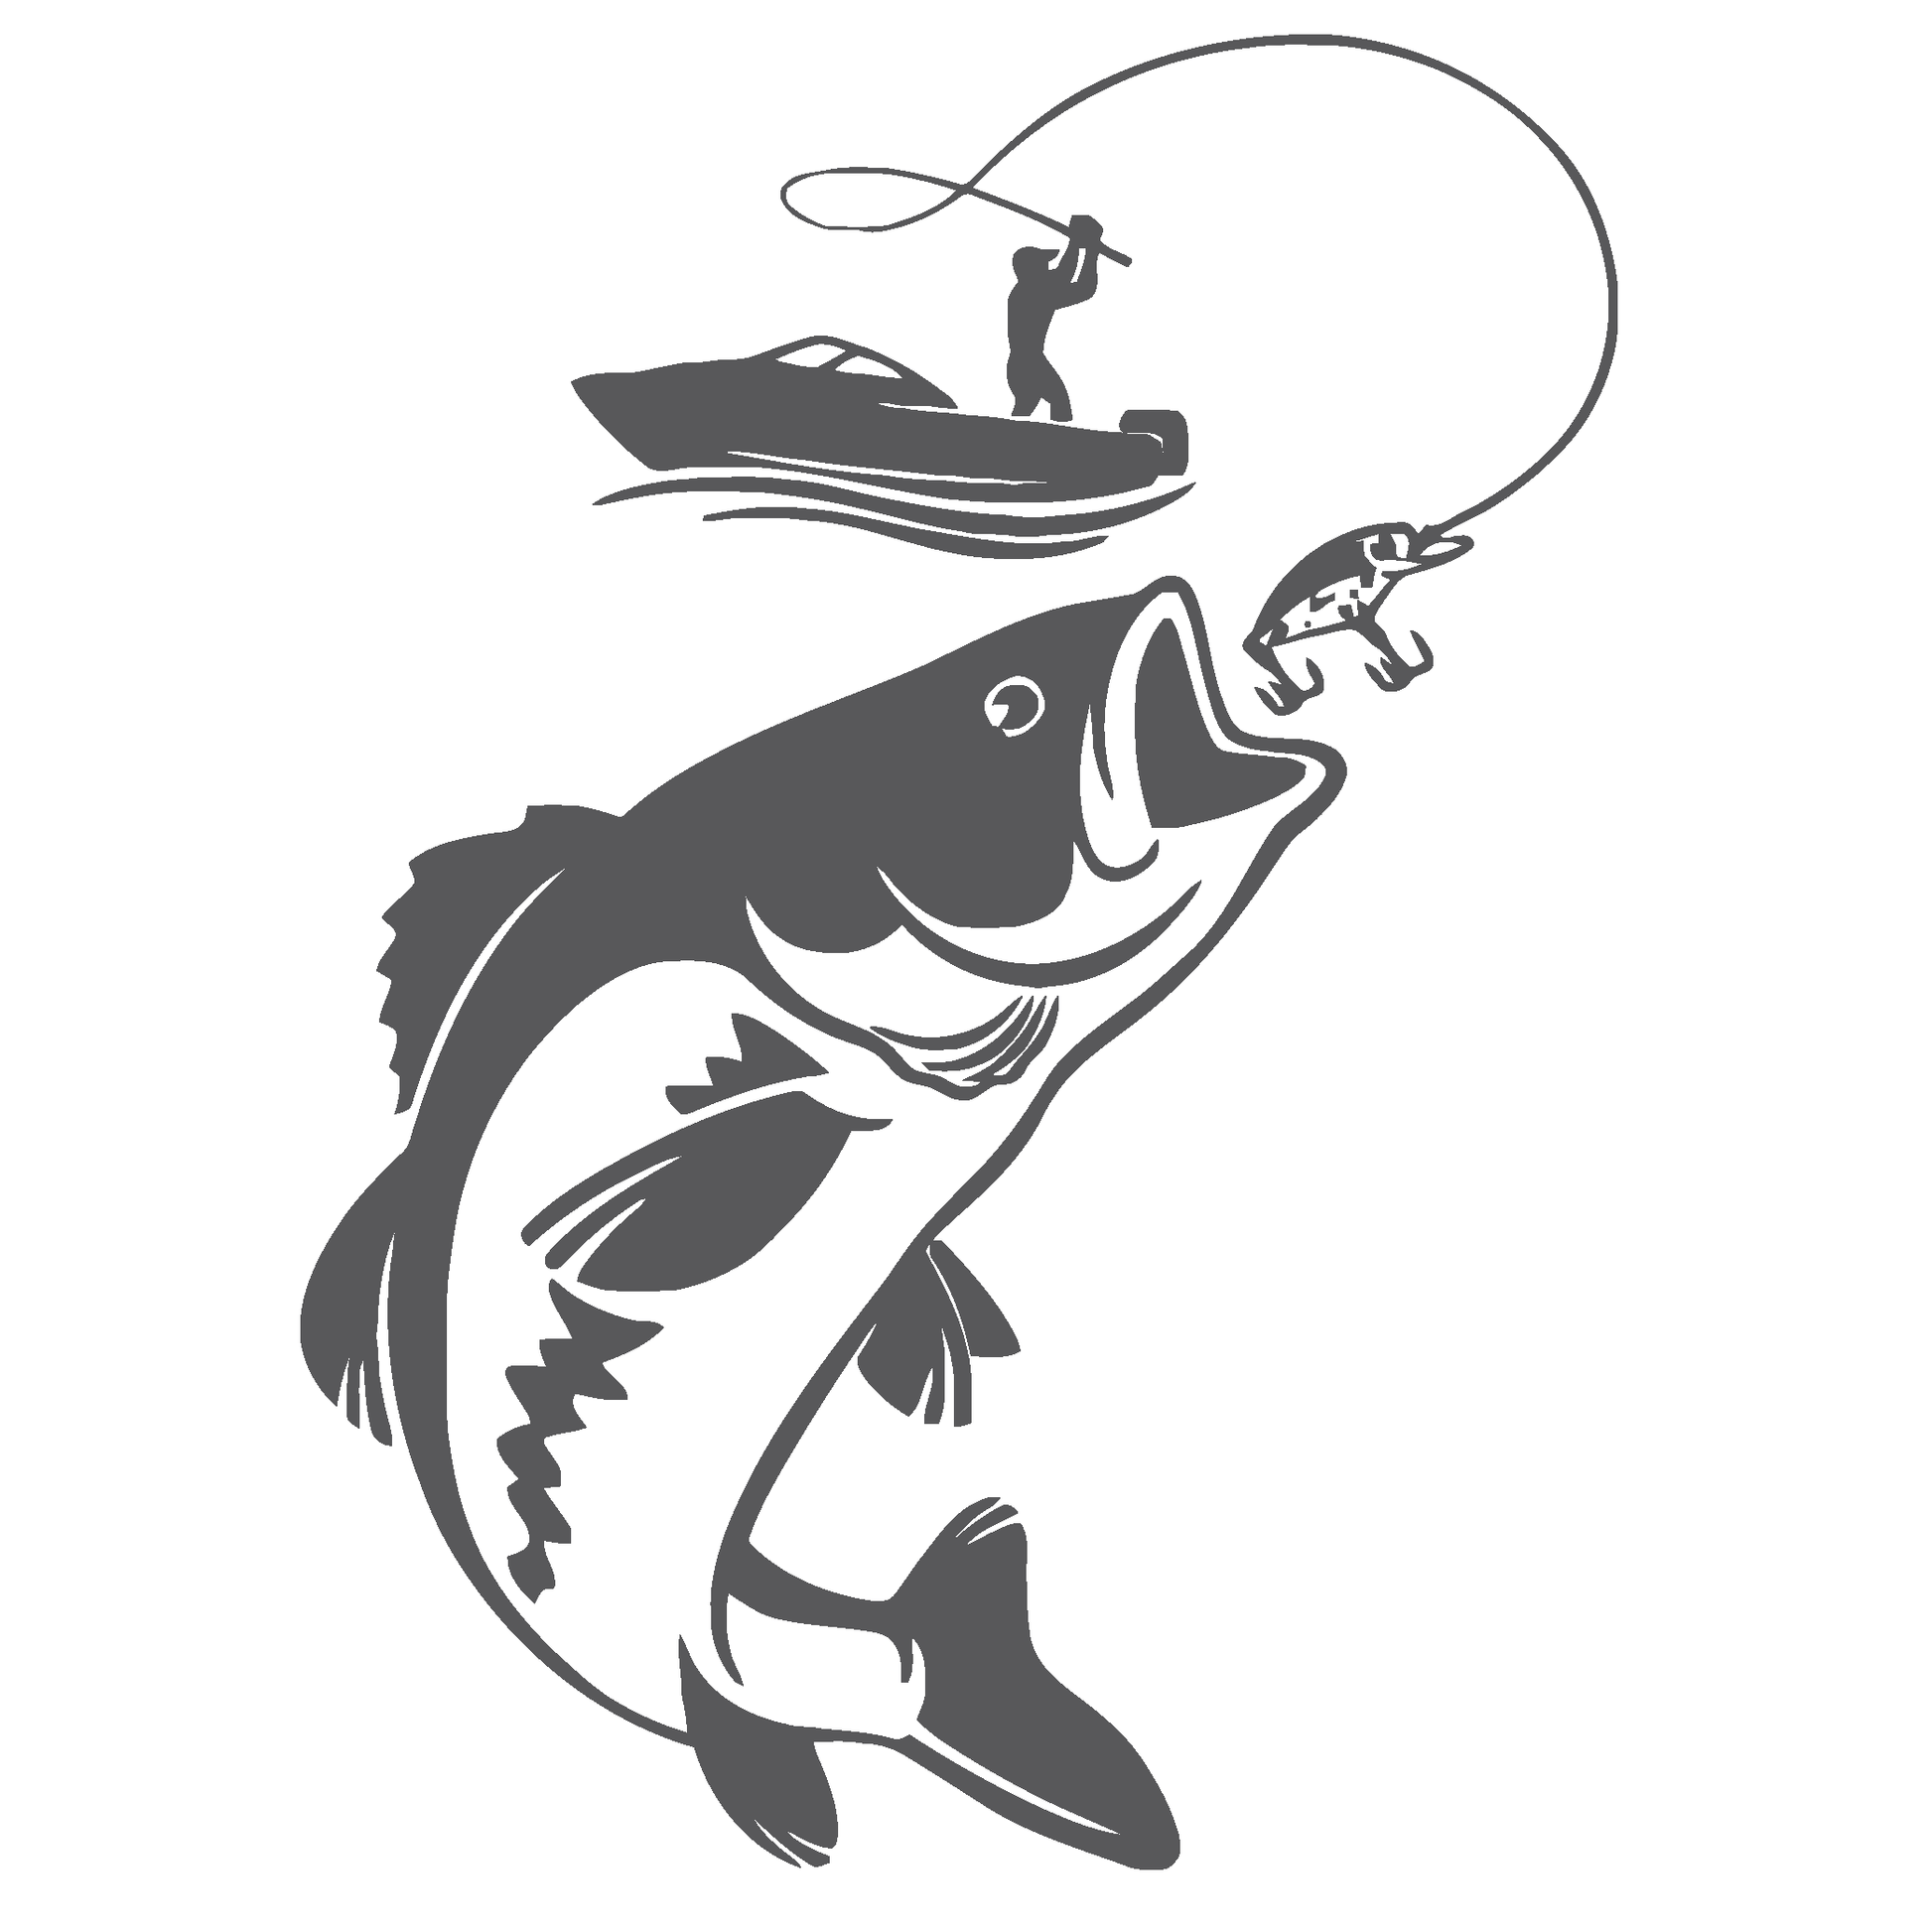 ShopVinylDesignStore.com Man Fishing From Boat For Bass Fish Wide Shop Vinyl Design decals stickers